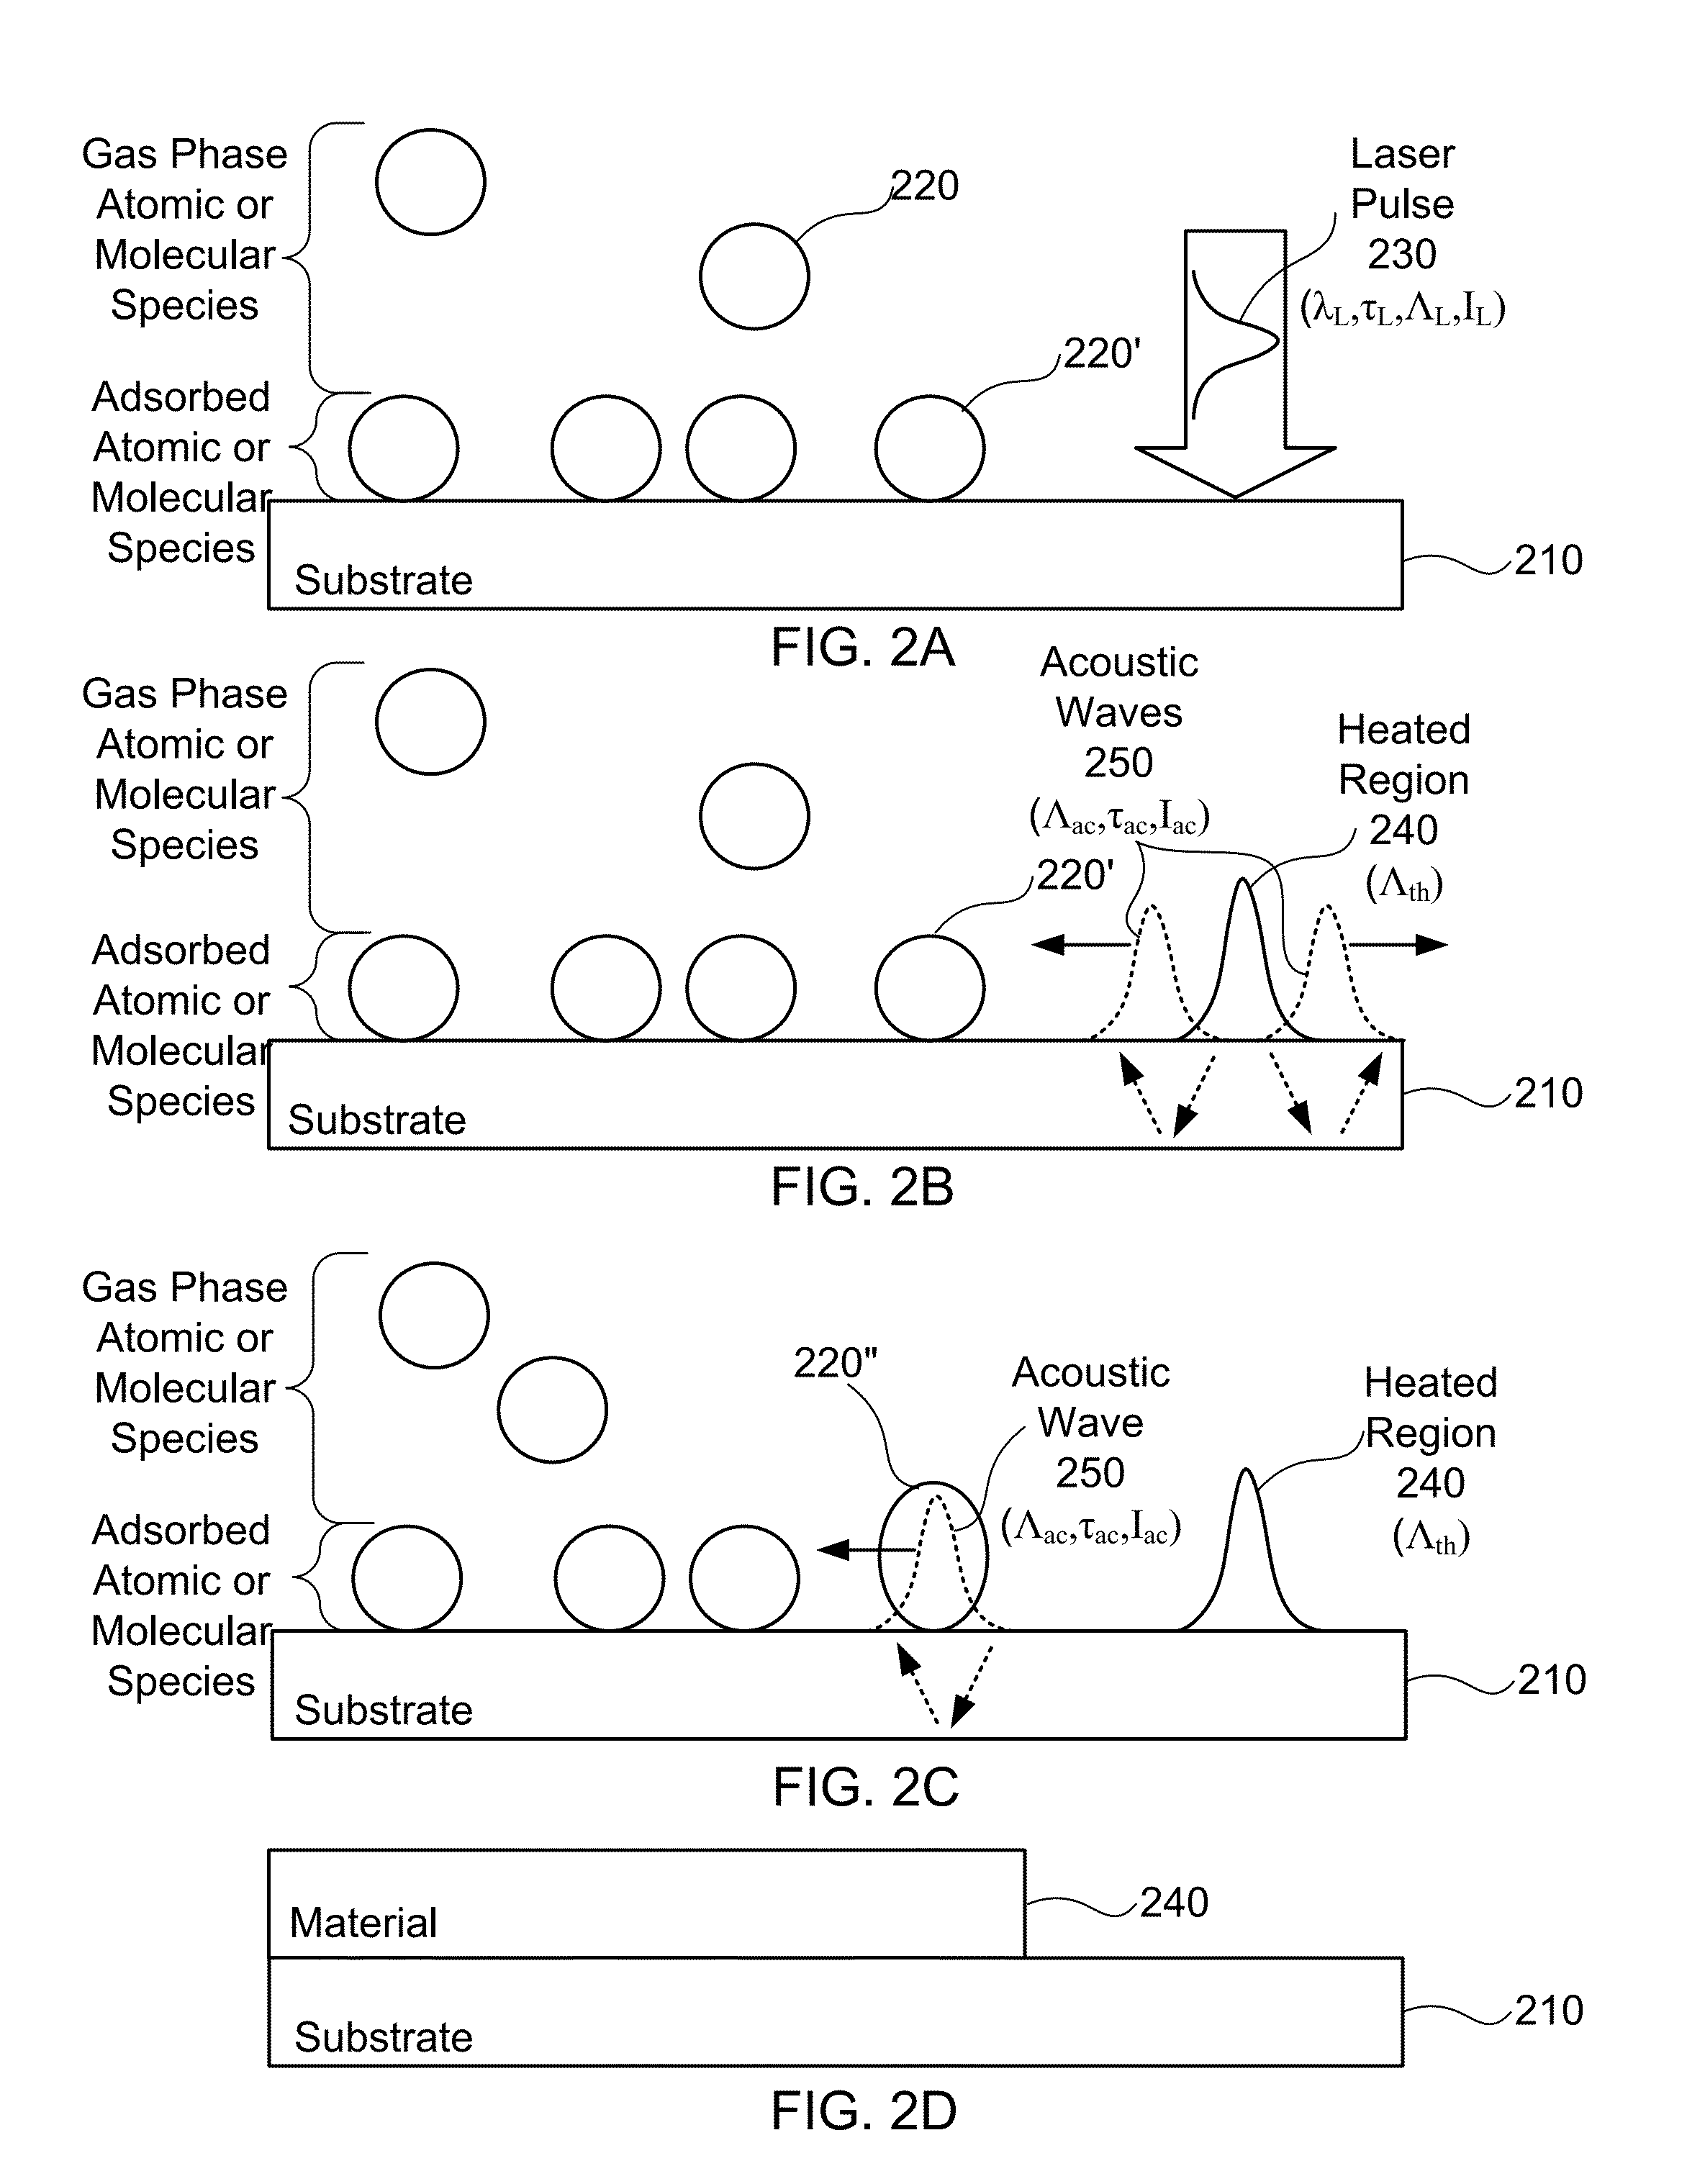 Systems and methods for enhancing mobility of atomic or molecular species on a substrate at reduced bulk temperature using acoustic waves, and structures formed using same